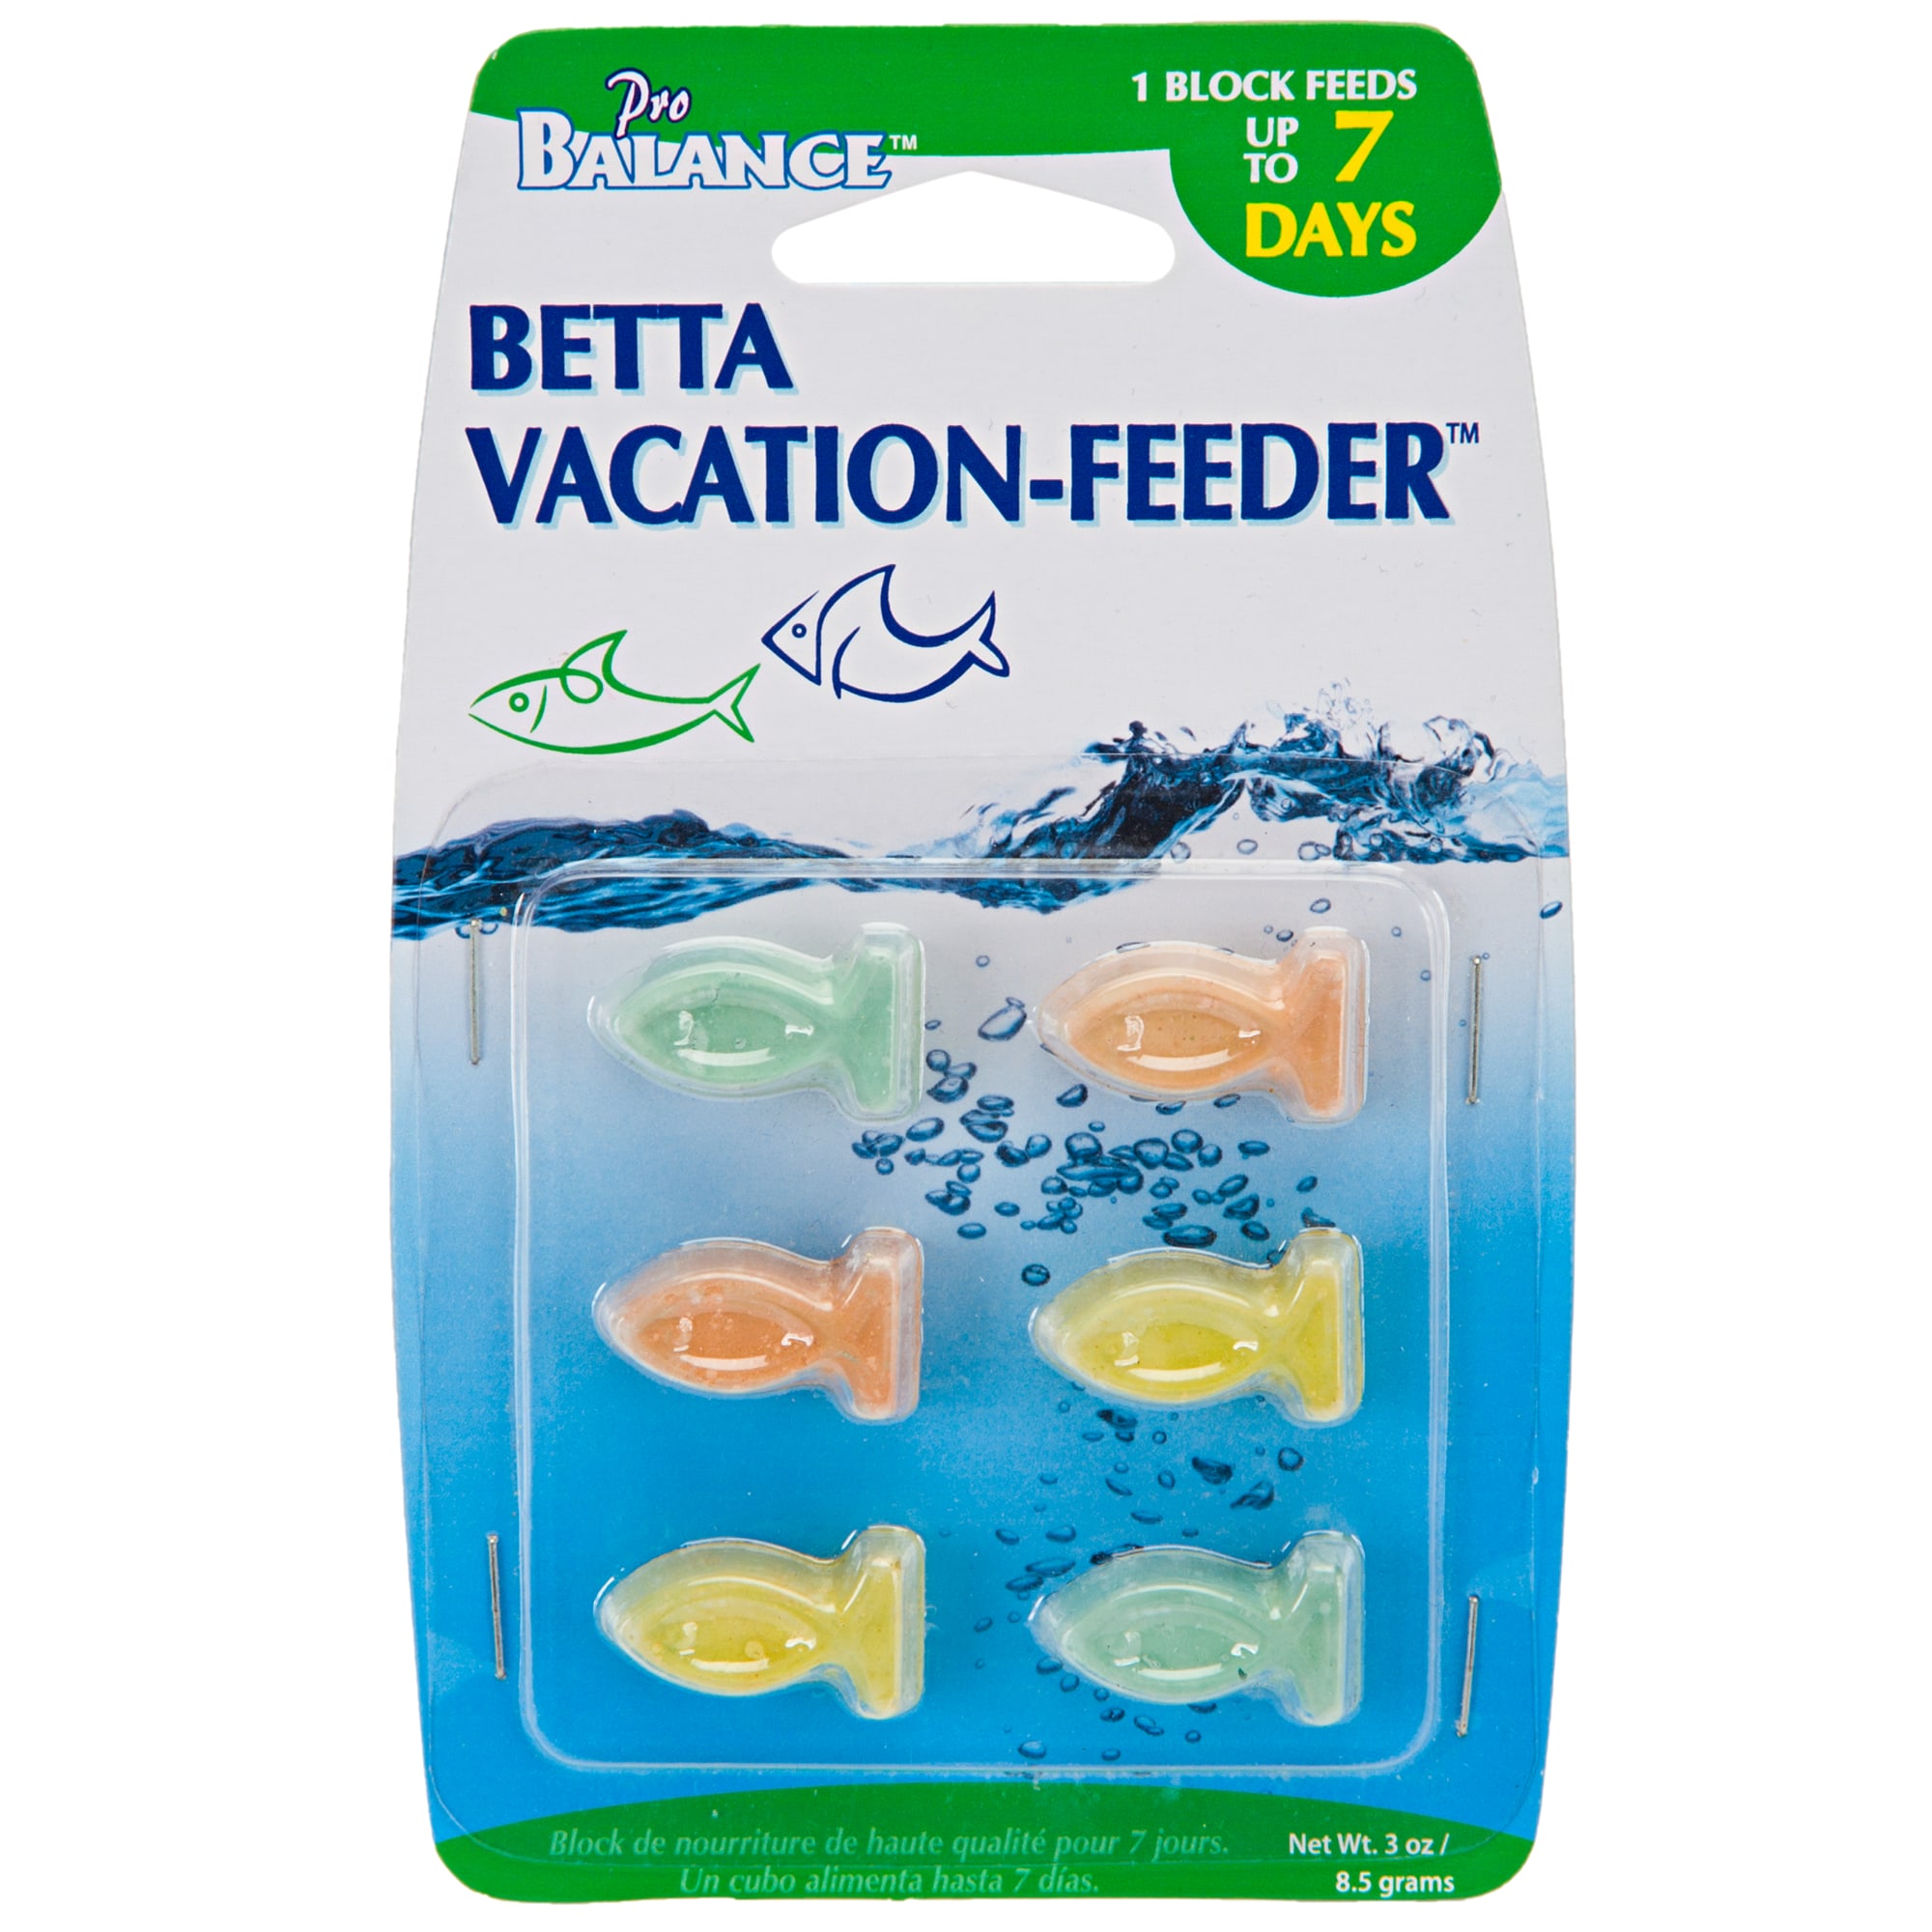 Top 10 Vacation Fish Feeders for Betta